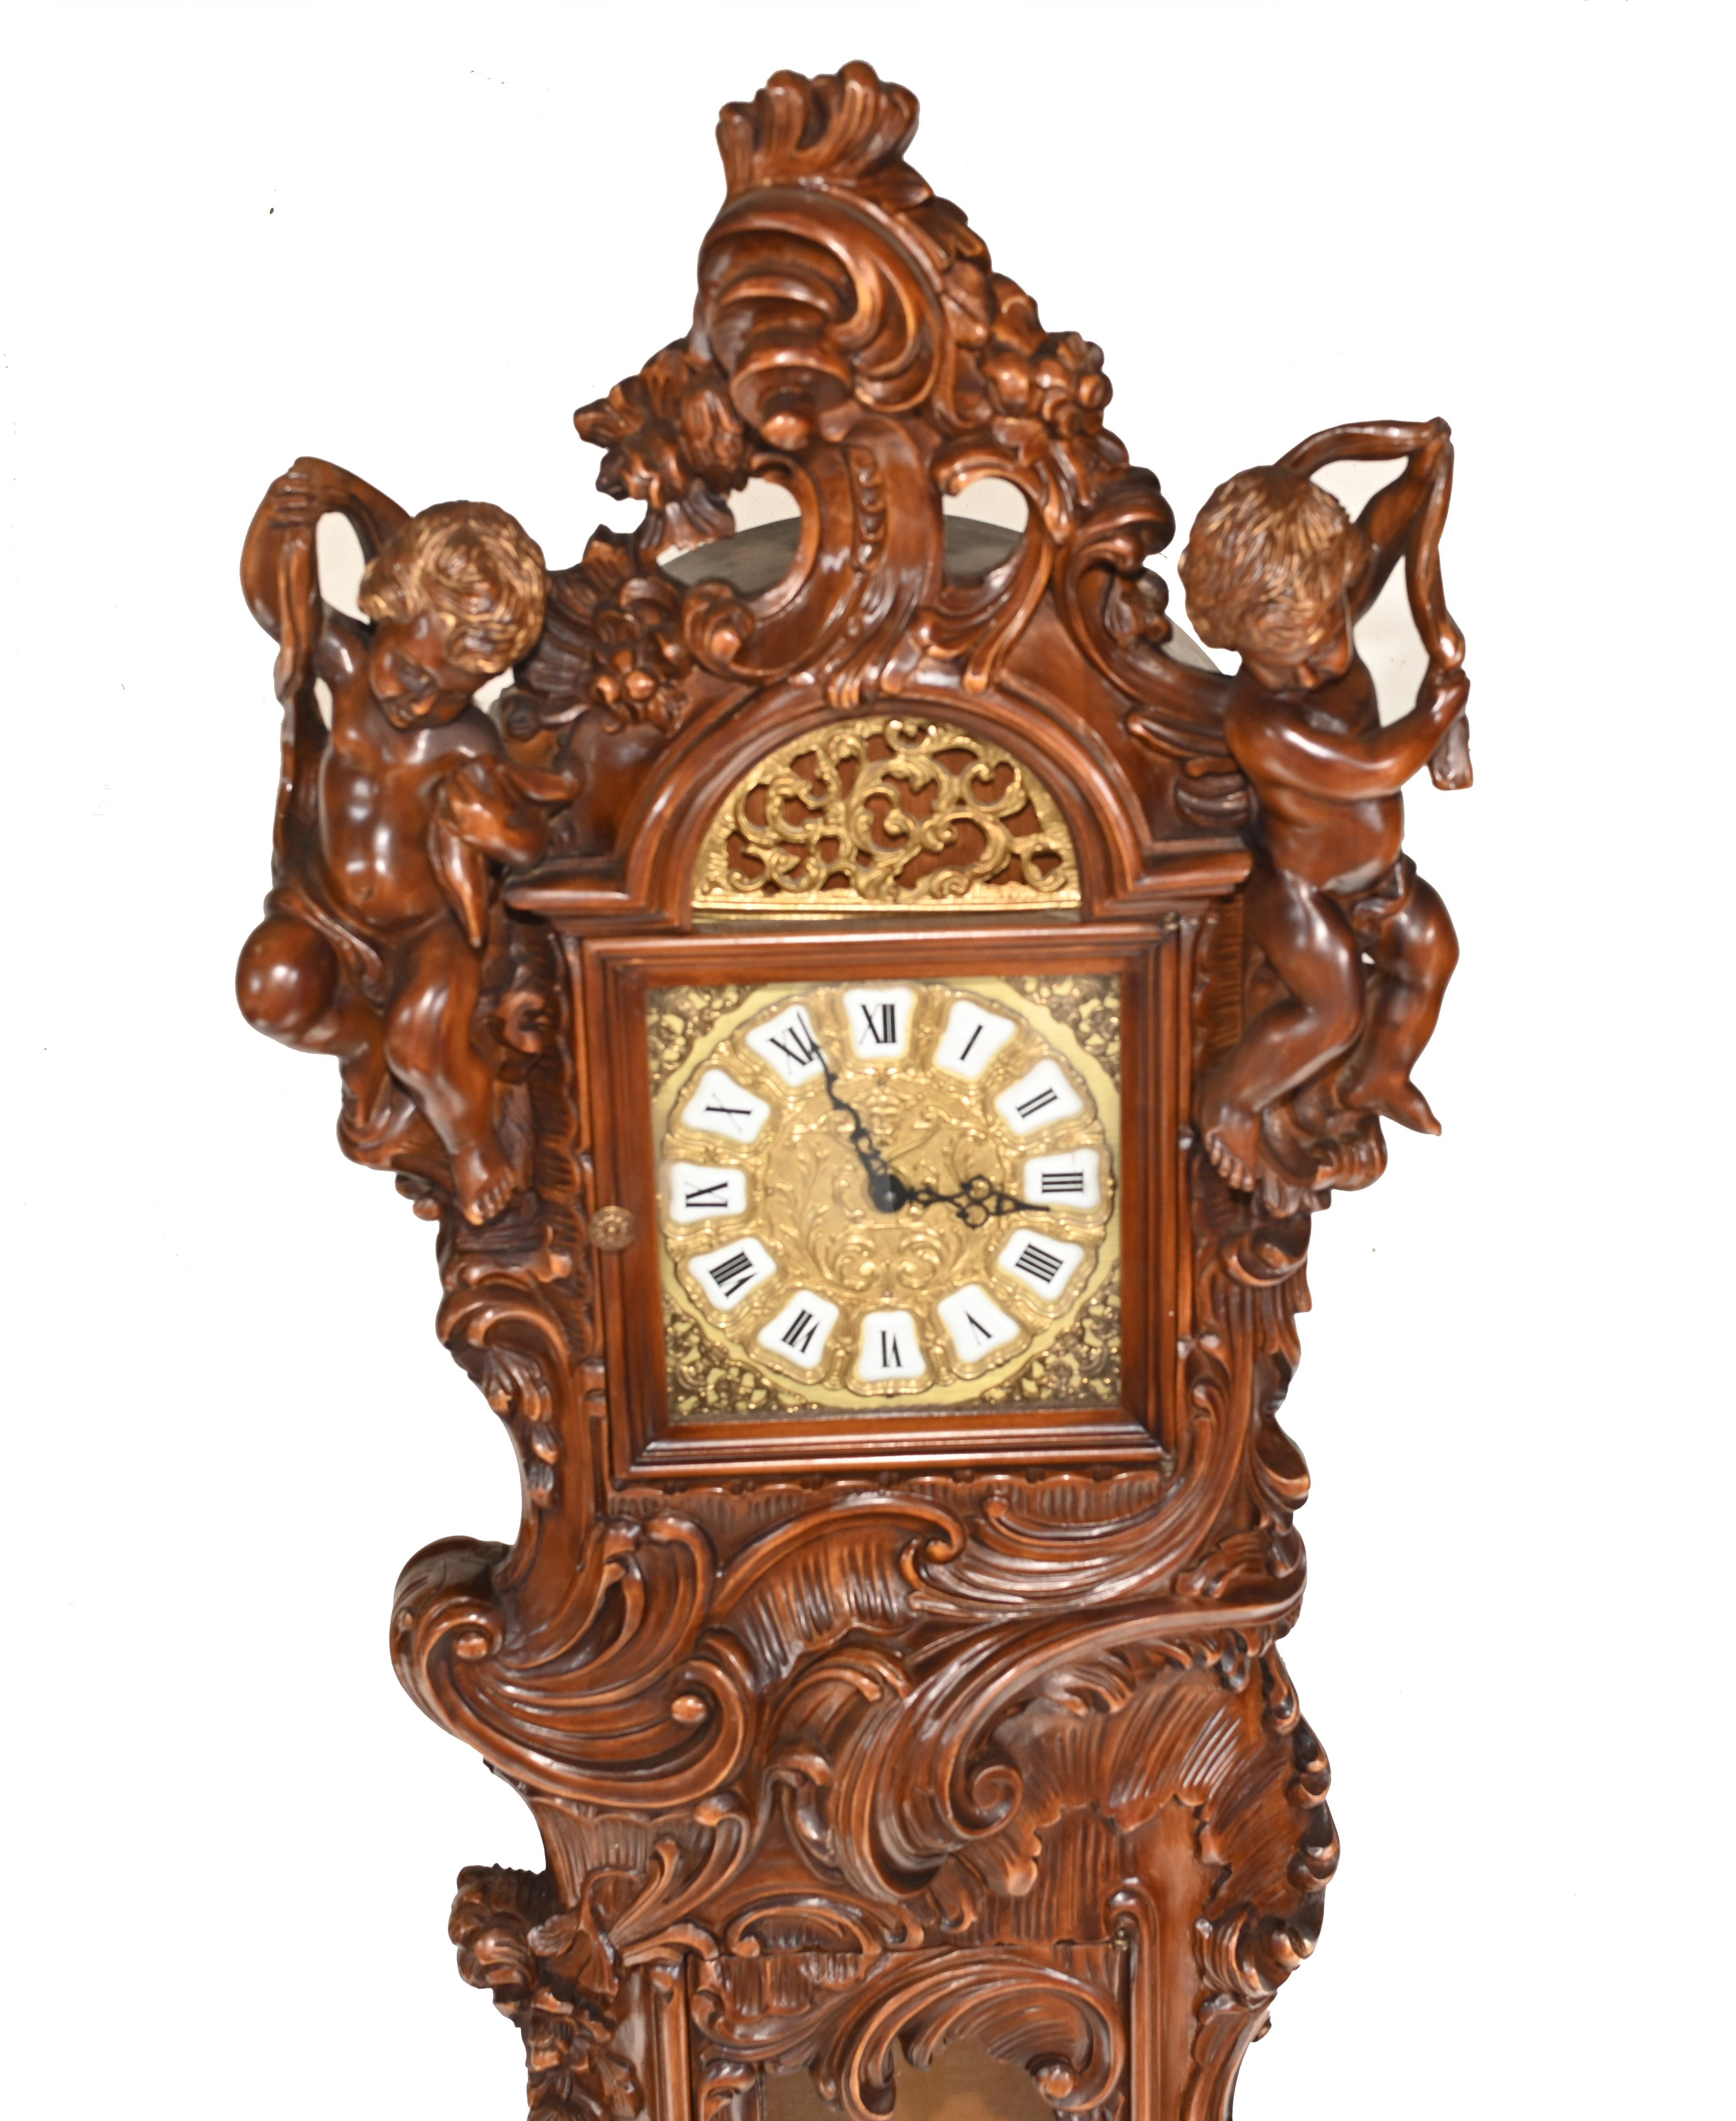 Elegant Italian antique grandfather clock in walnut
Proffusely carved with variouis motifs and cherubs
The workmanship is superb, definitely the work of a skilled carver
We date the clock to circa 1890
Some of our items are in storage so please